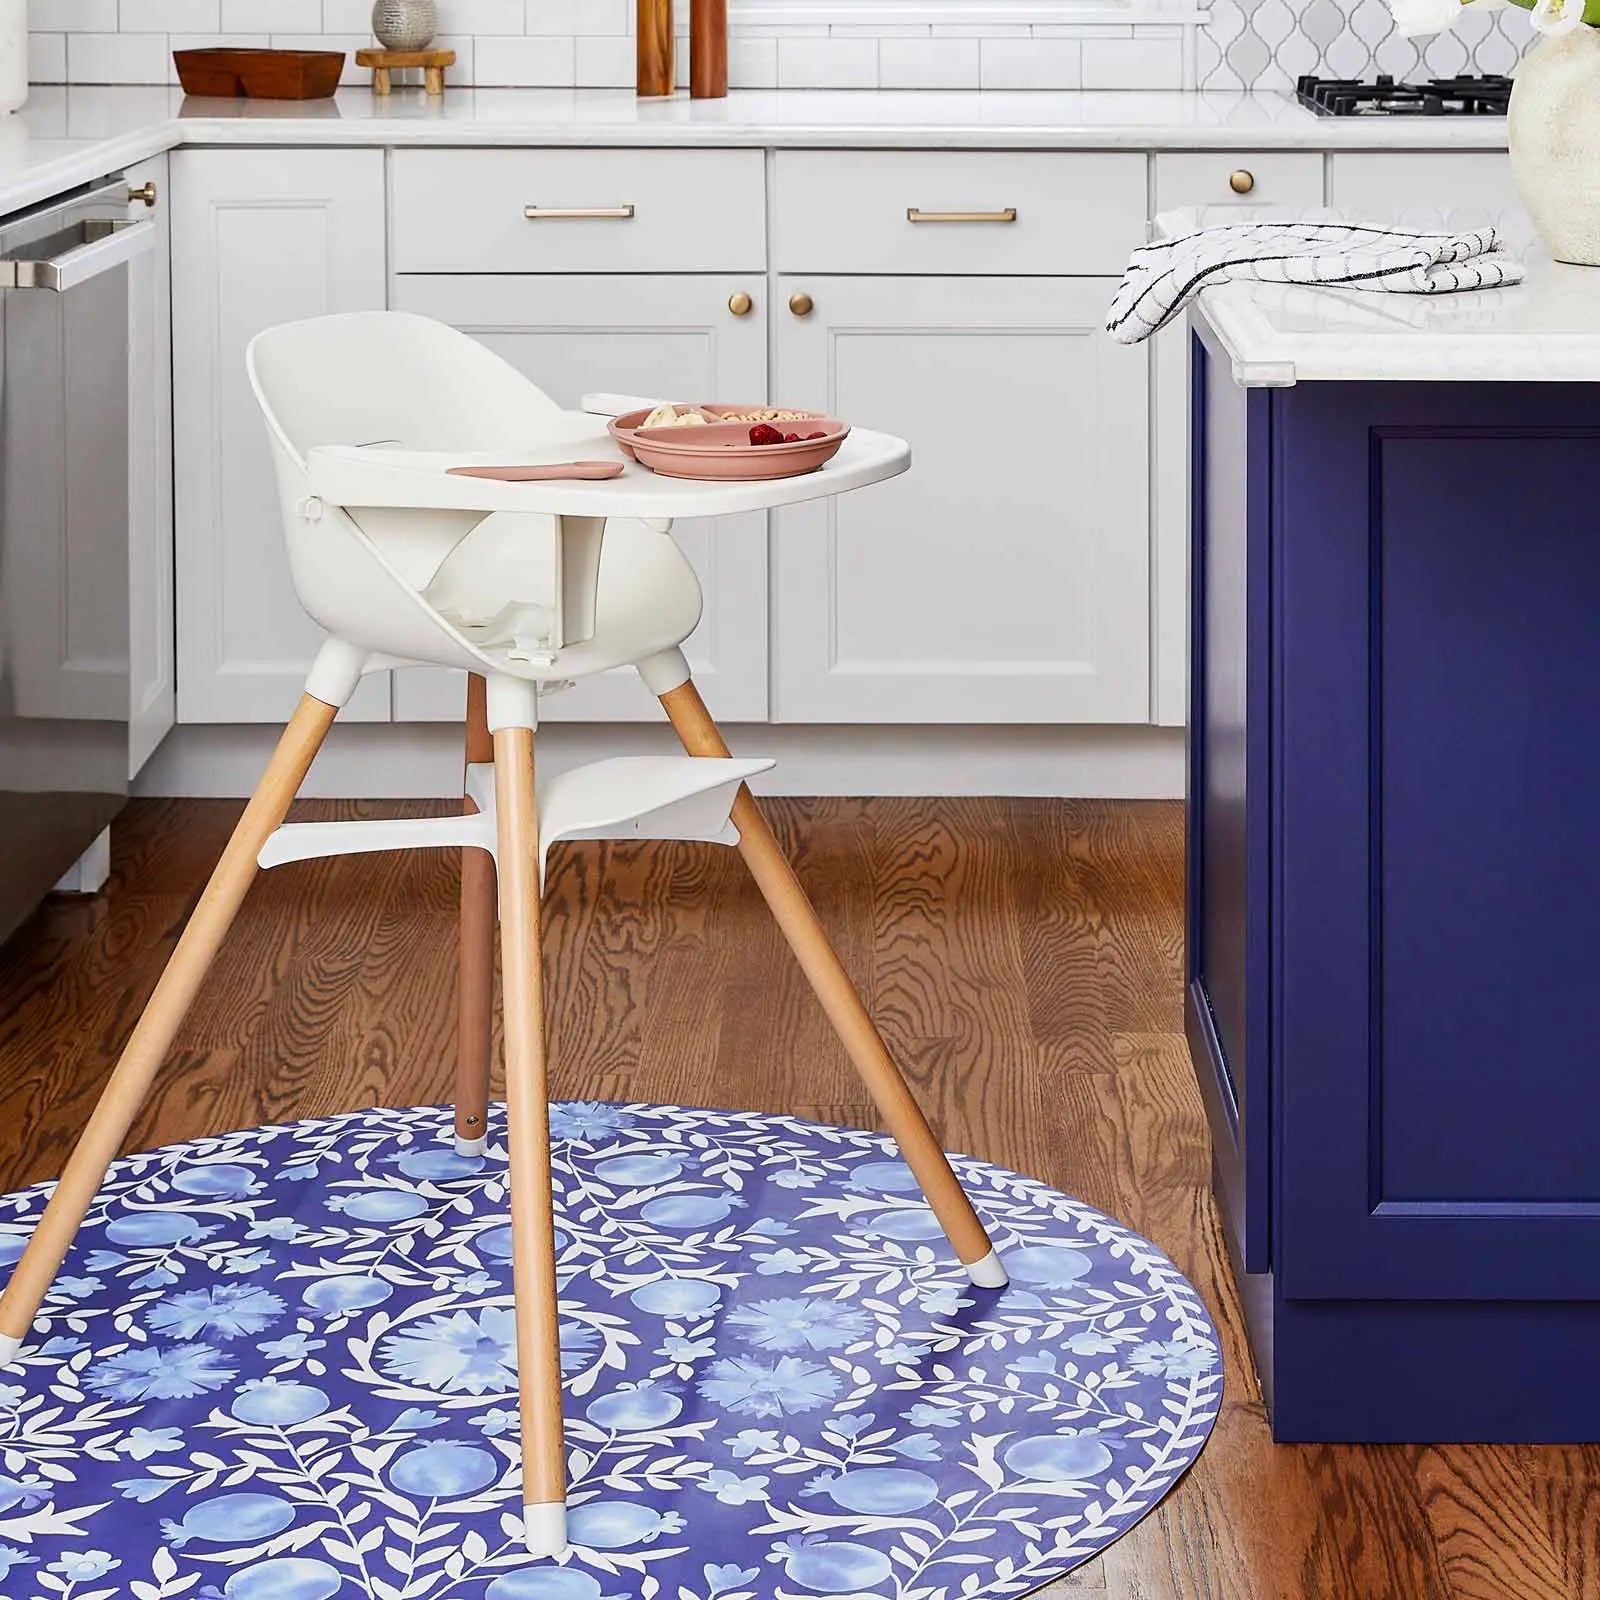 Suzette deep sea blue and white floral vine print highchair mat shown in kitchen under a highchair with a plate of fruit on it